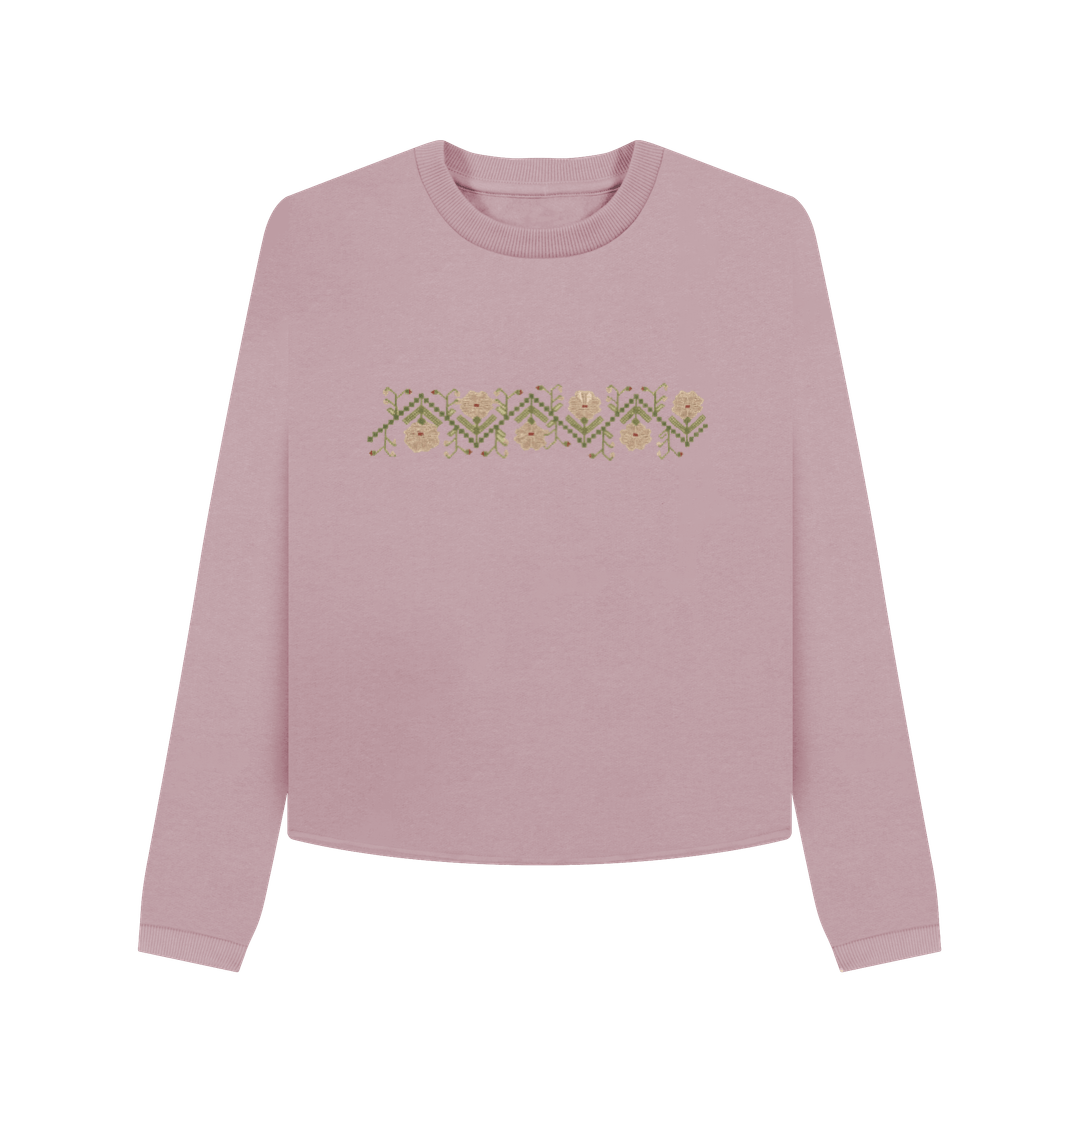 Mauve Women's Sampler Flower Band, Cropped Crew Neck sweater